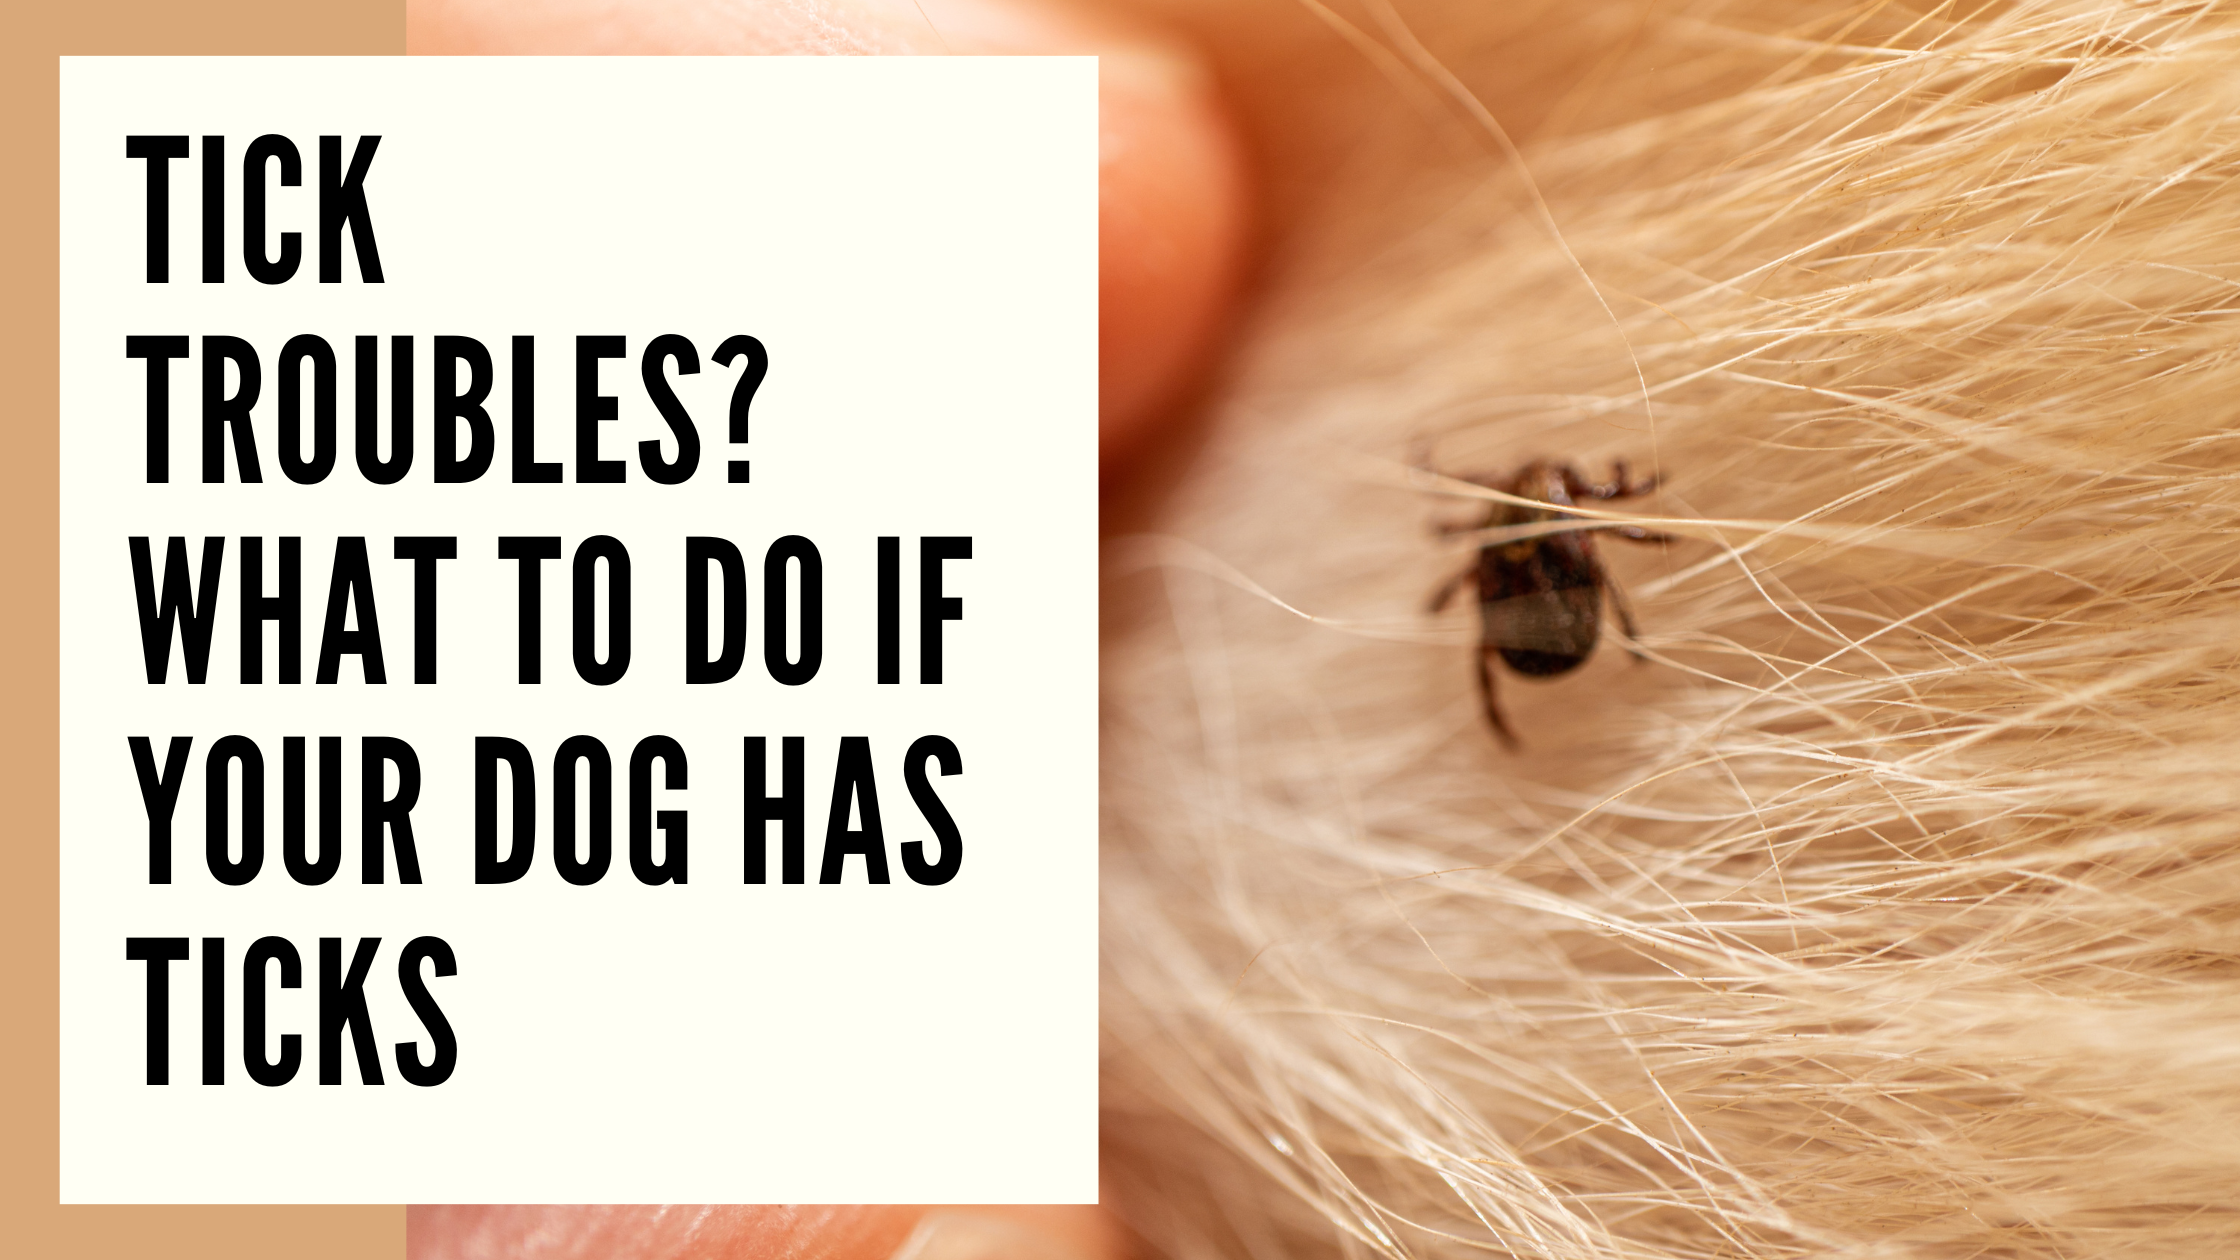 What to do if your Dog has Ticks